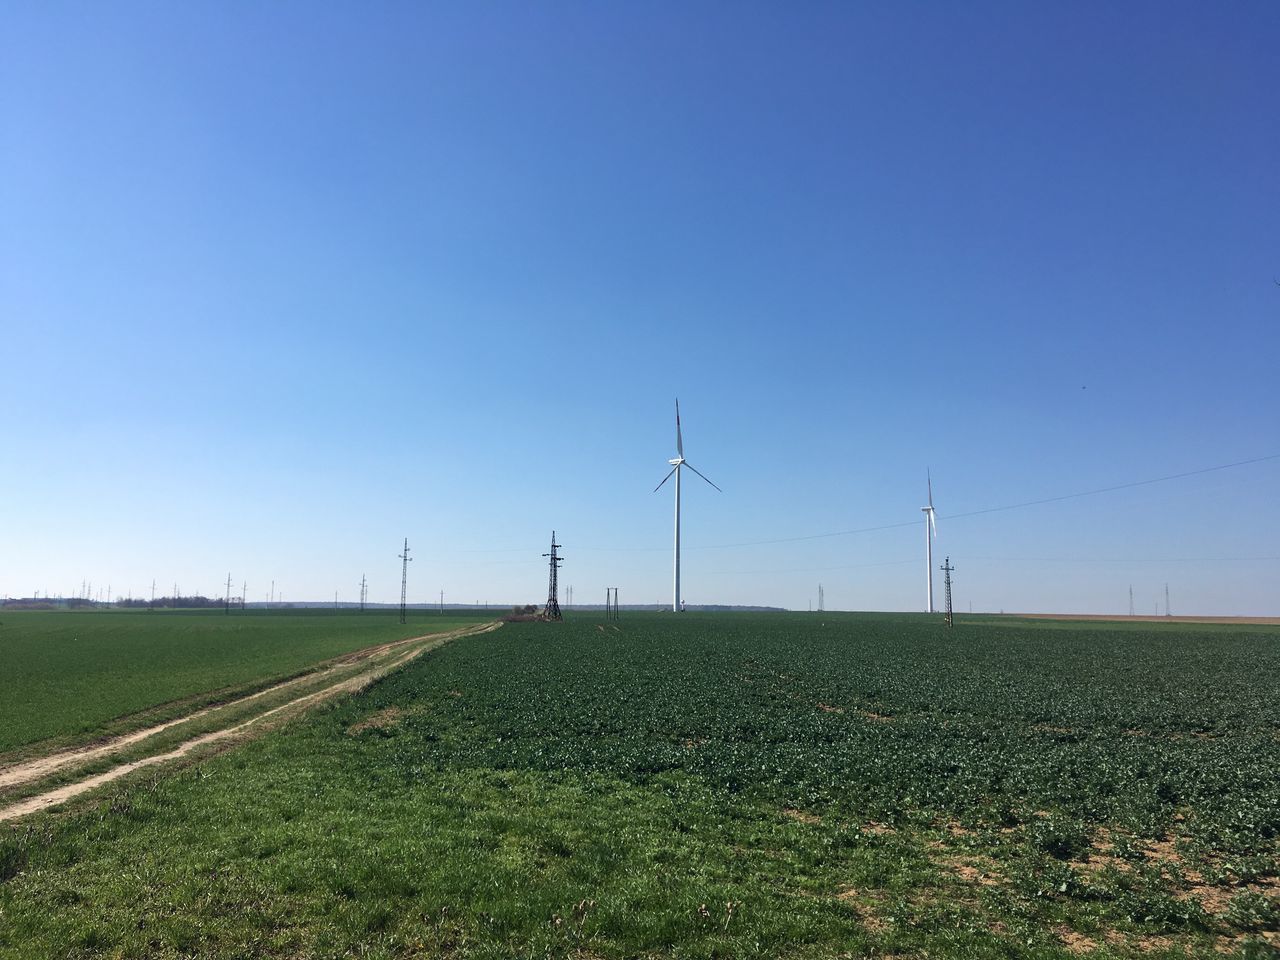 environment, environmental conservation, fuel and power generation, sky, turbine, renewable energy, wind turbine, landscape, alternative energy, field, land, blue, wind power, rural scene, grass, clear sky, nature, copy space, technology, plant, no people, sustainable resources, outdoors, power supply